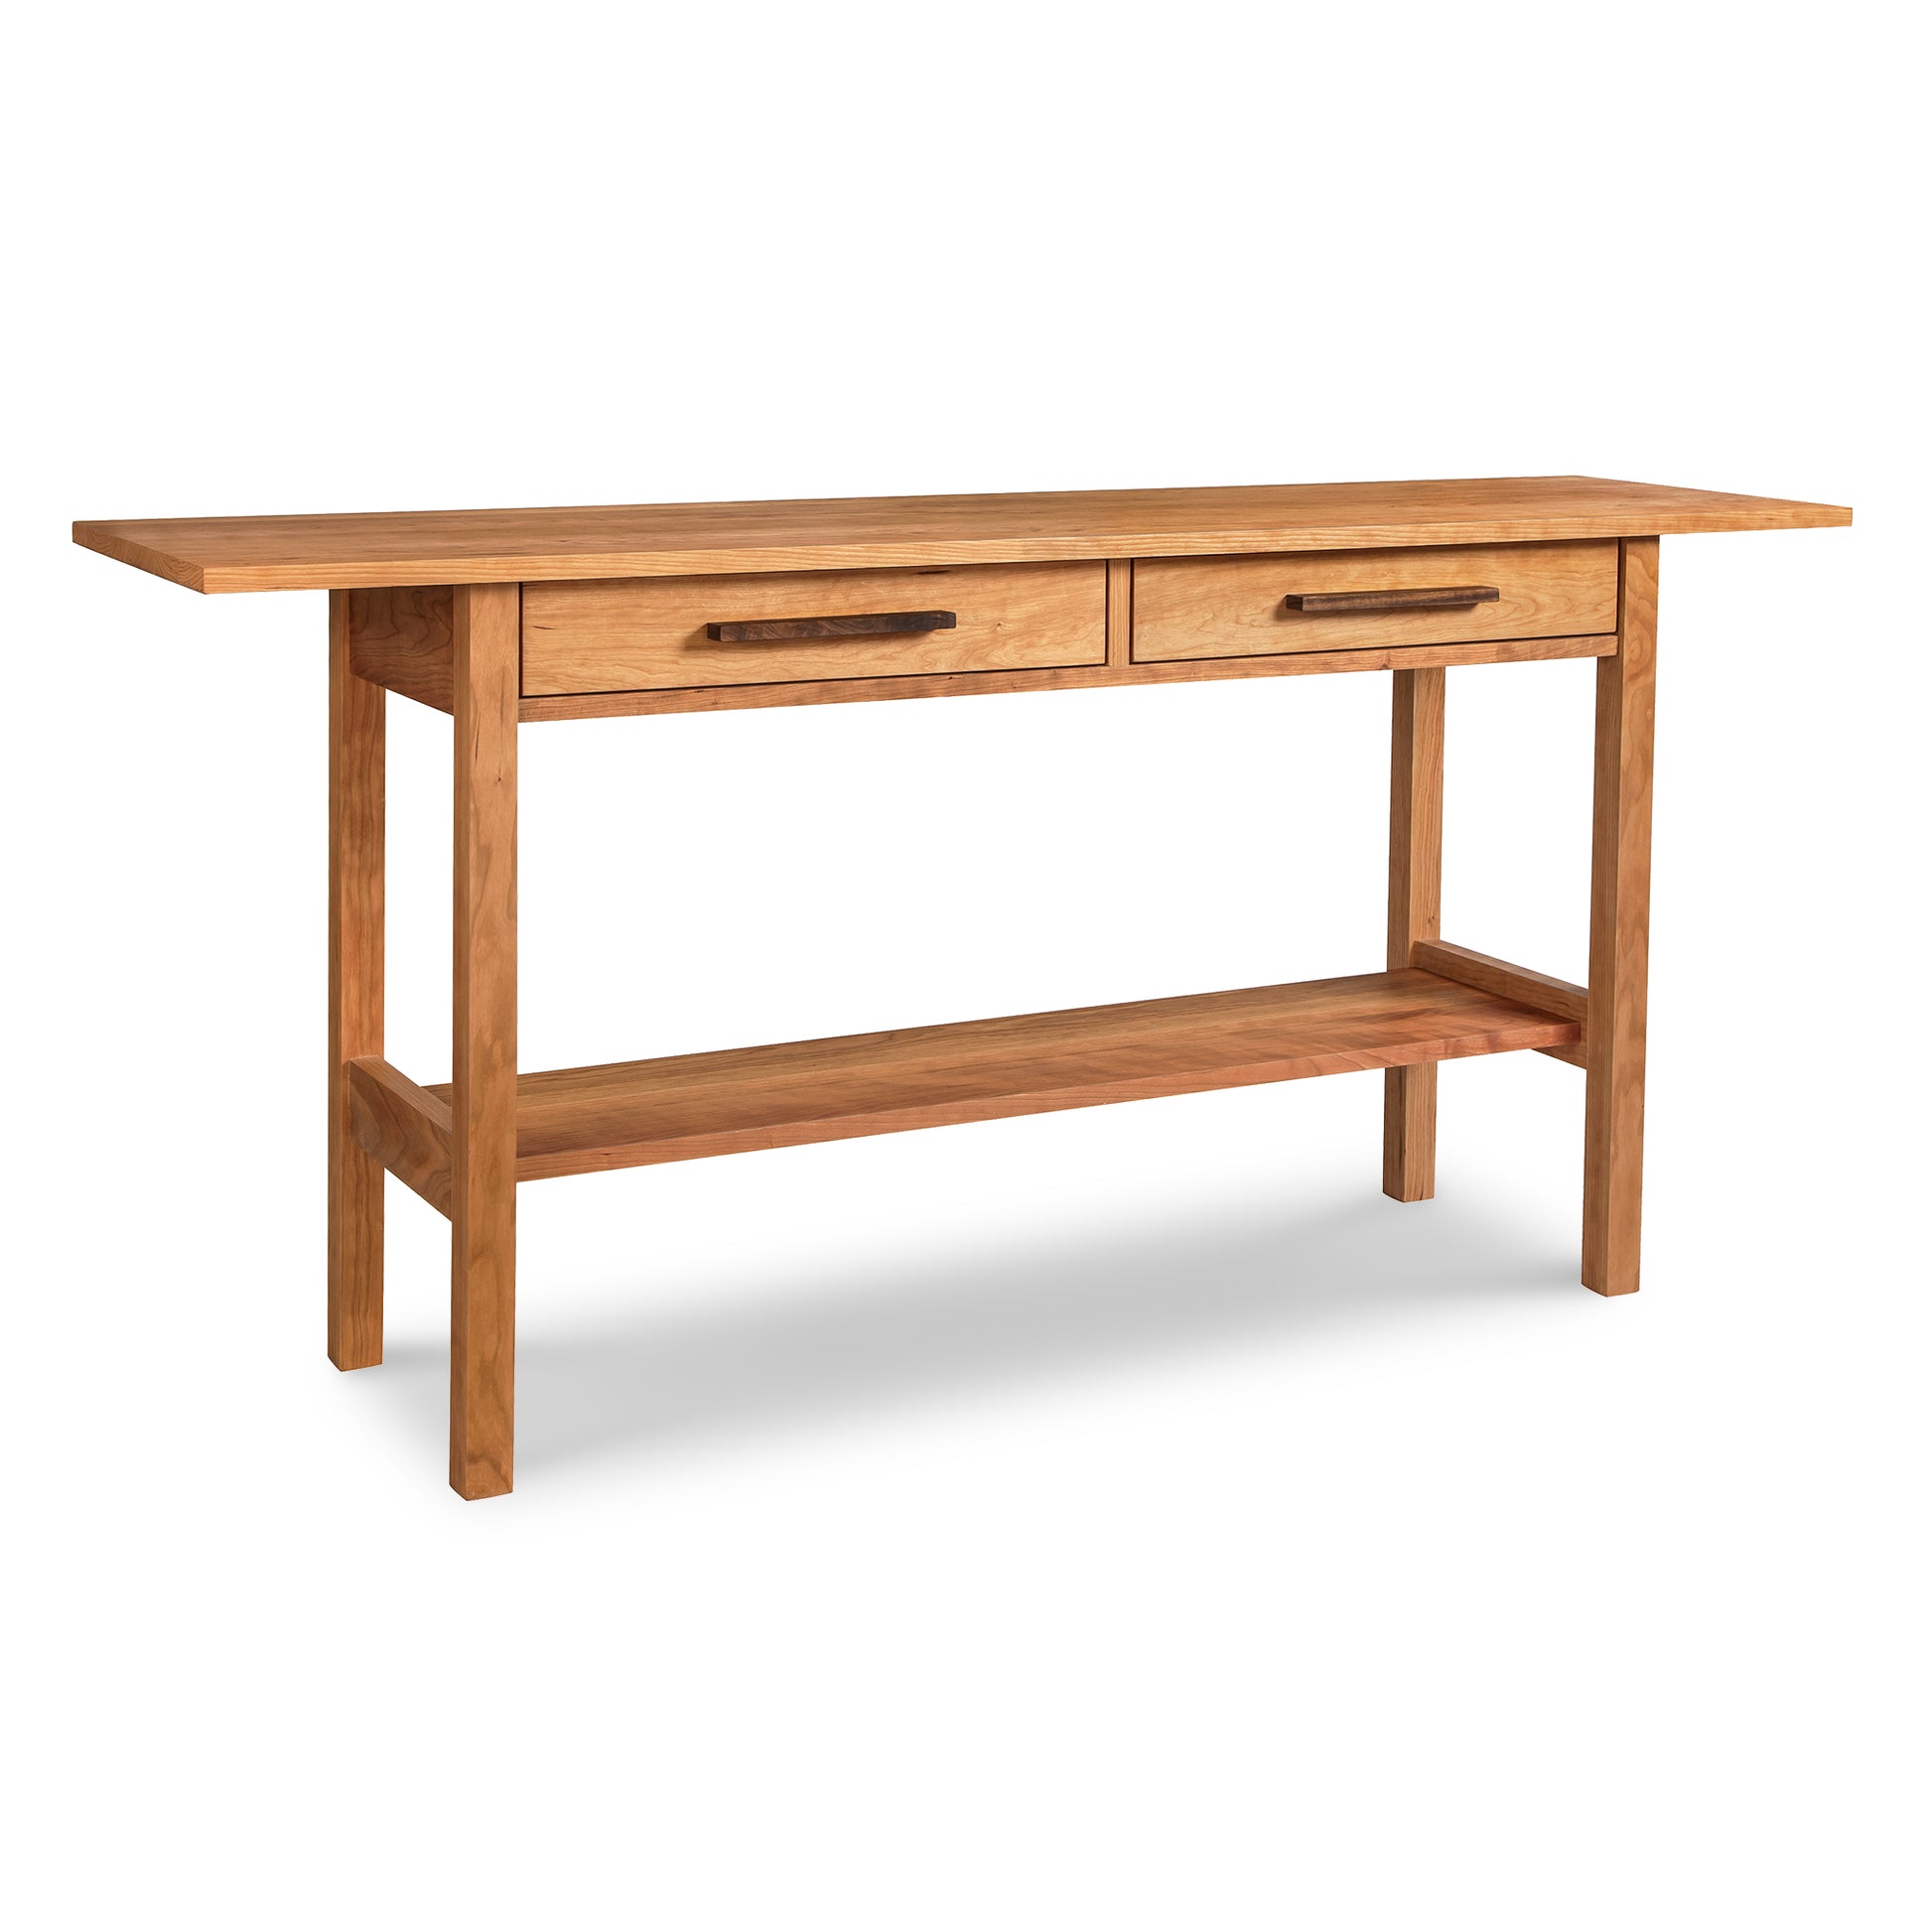 A wooden console table with two drawers.